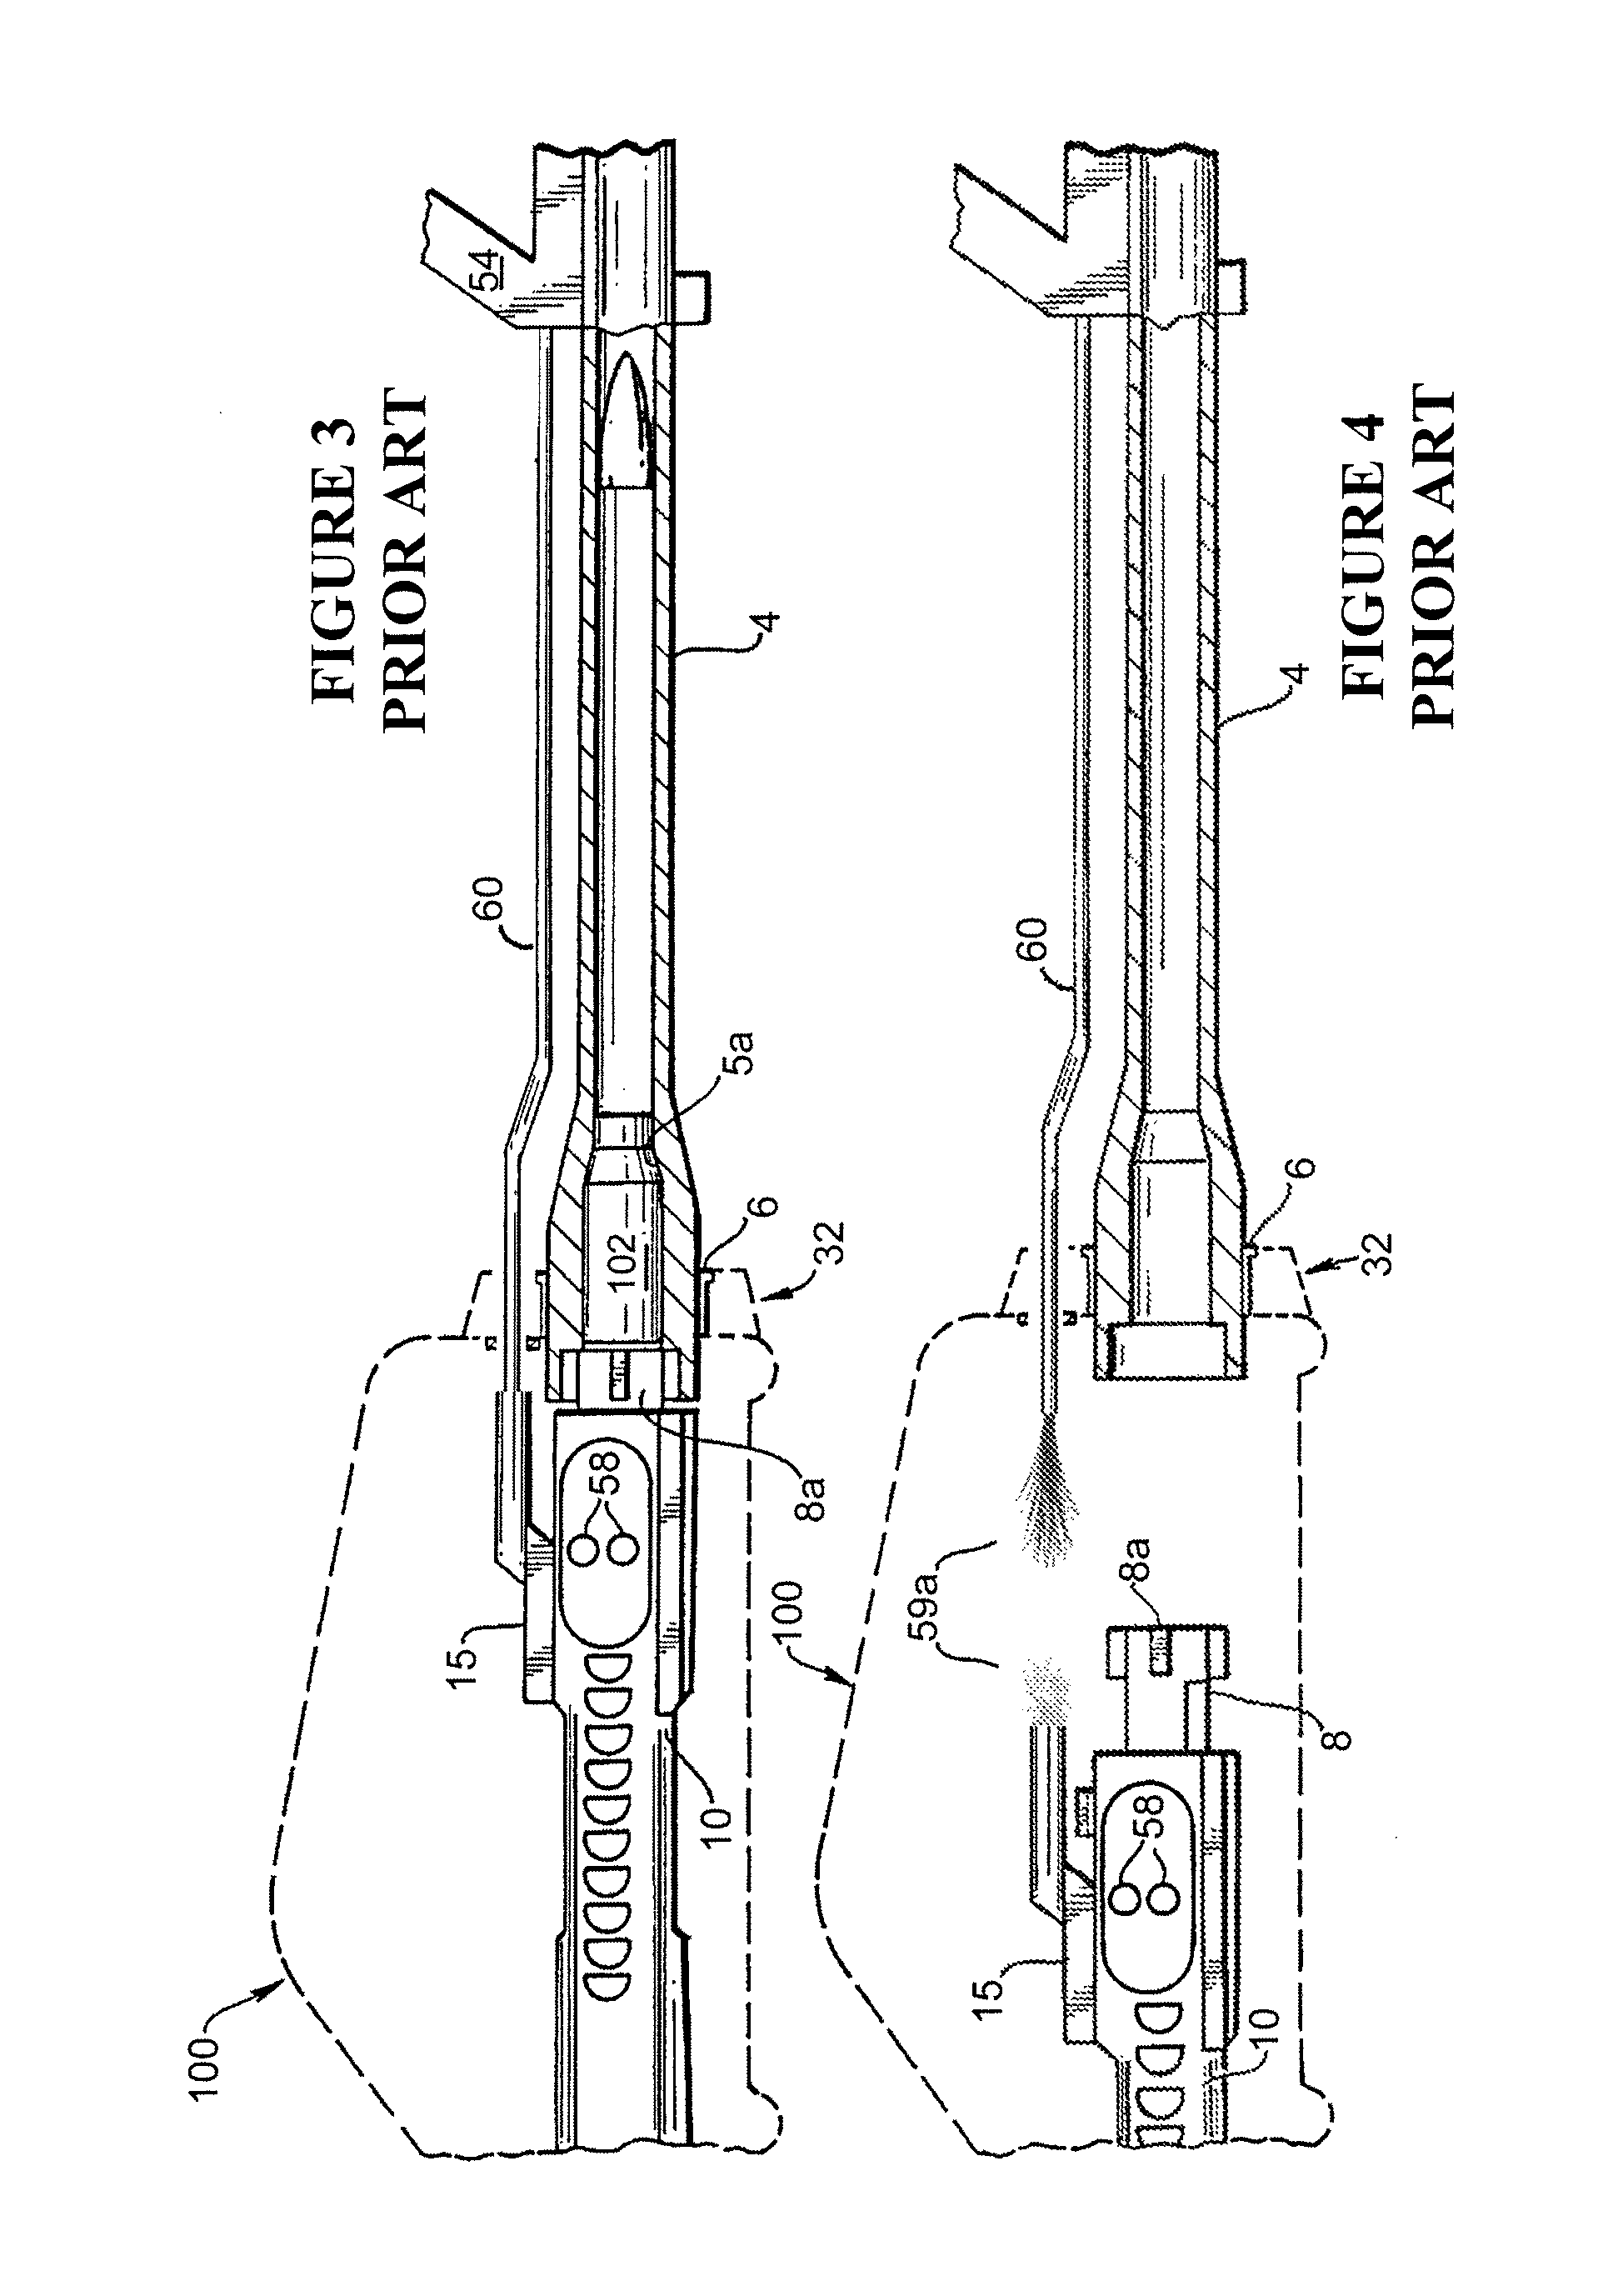 Firearm having a new gas operating system